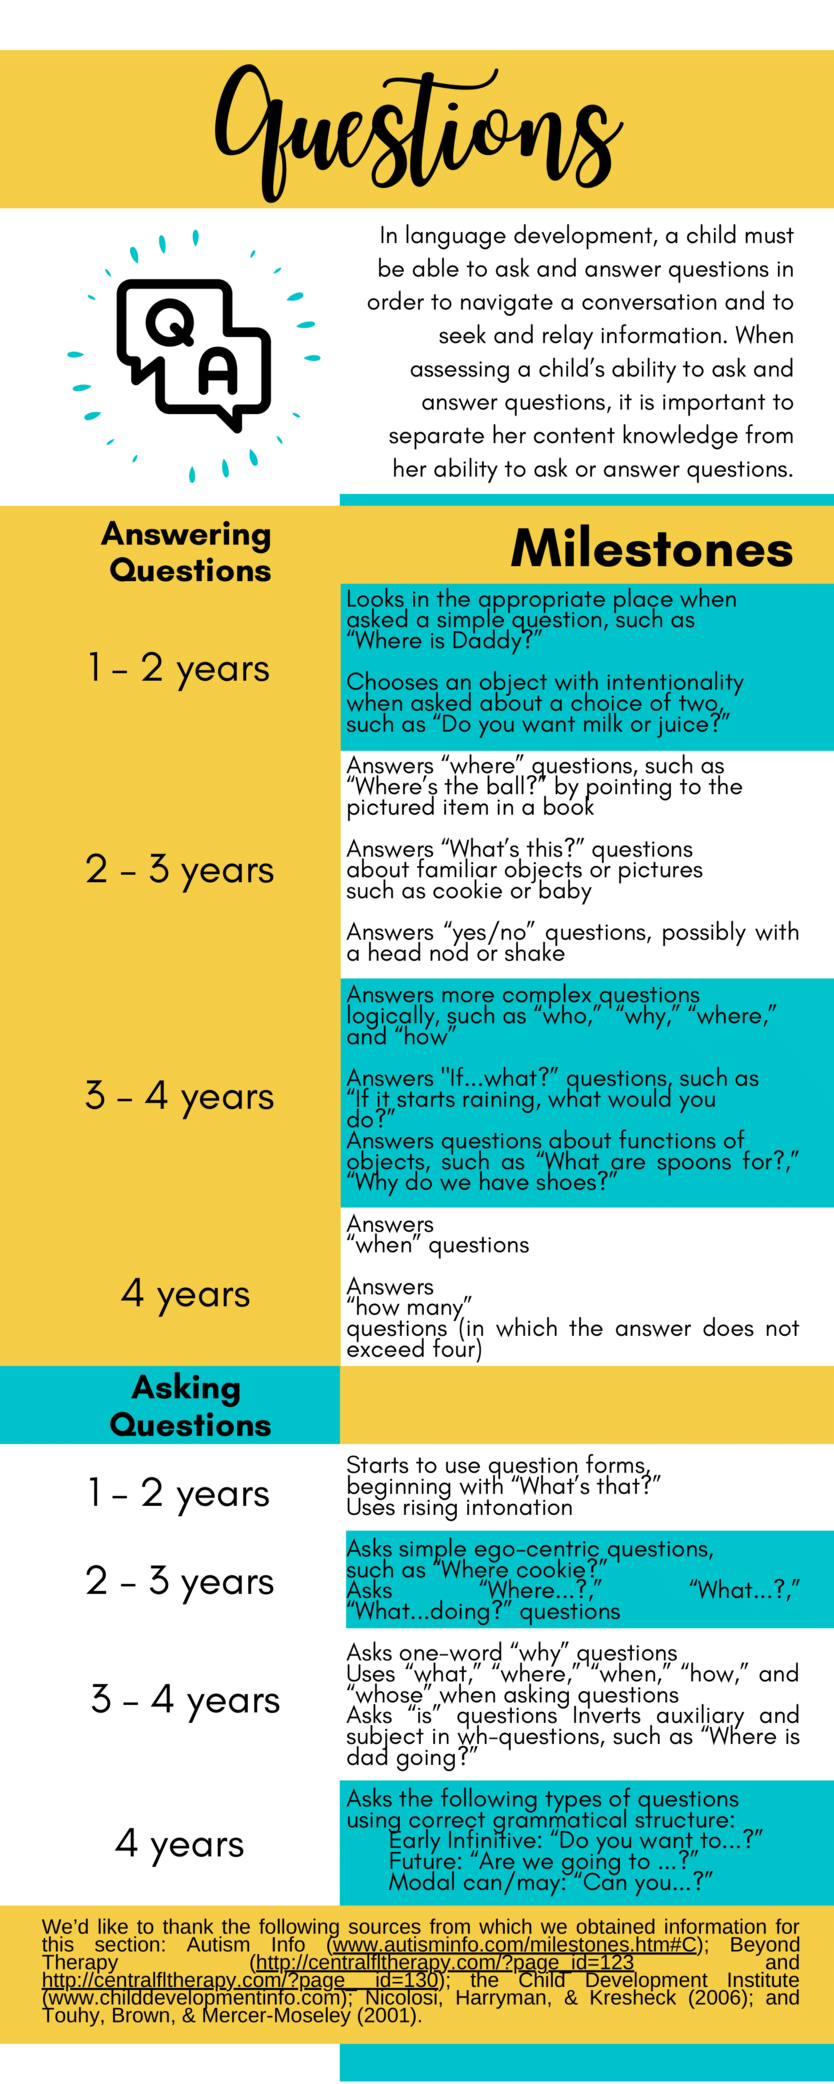 Question Answering and Asking Milestones 50